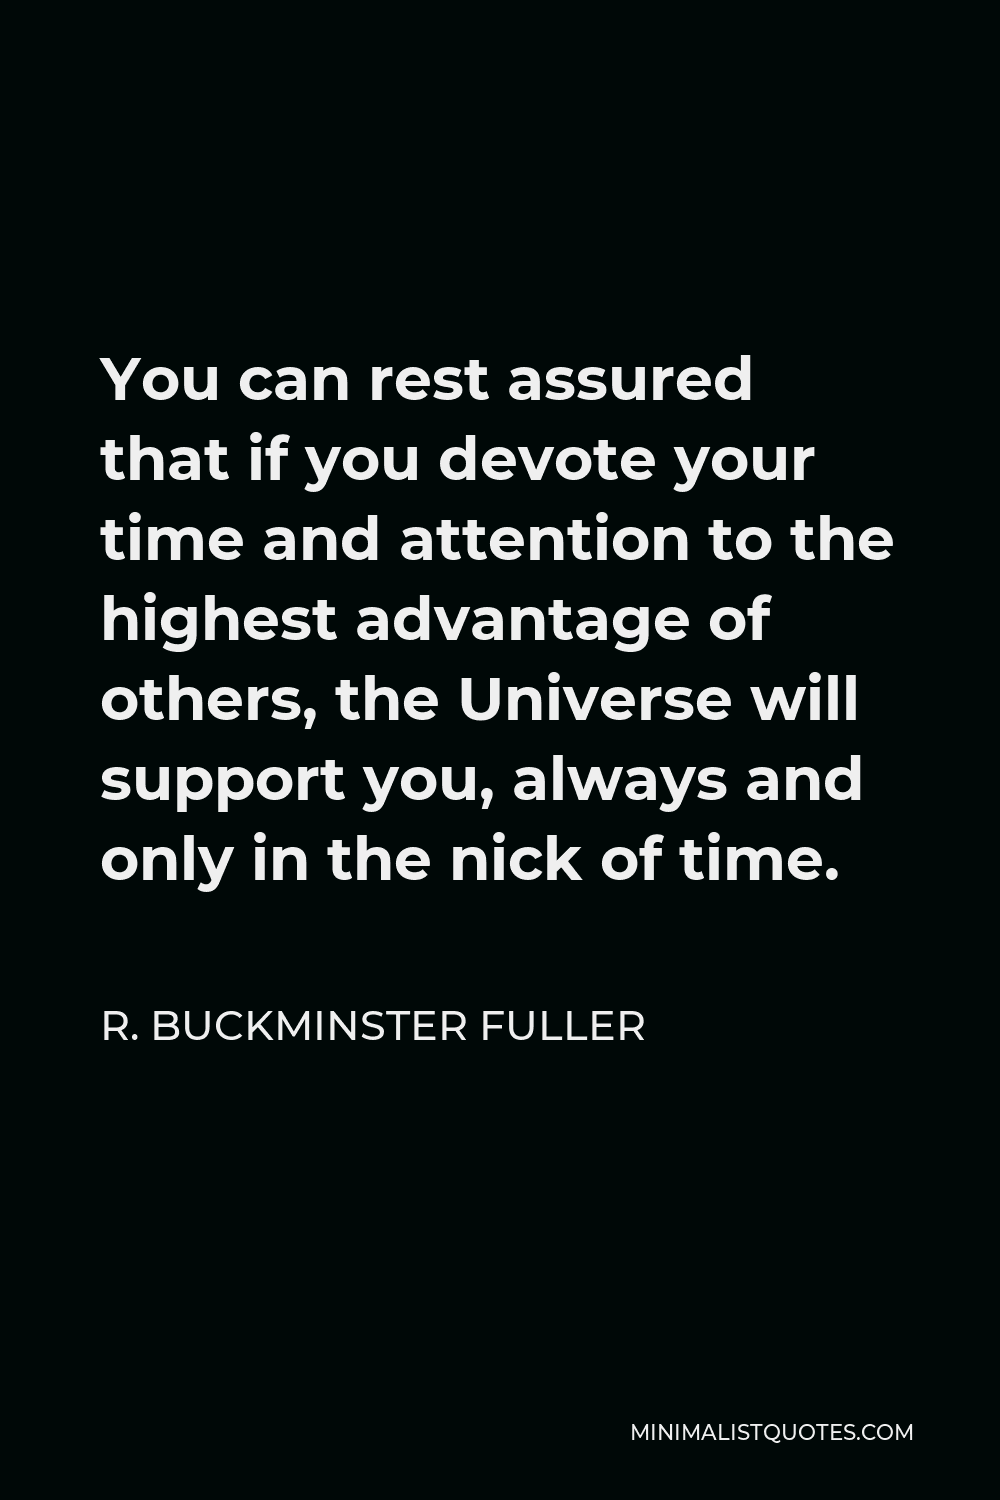 R. Buckminster Fuller Quote - You can rest assured that if you devote your time and attention to the highest advantage of others, the Universe will support you, always and only in the nick of time.